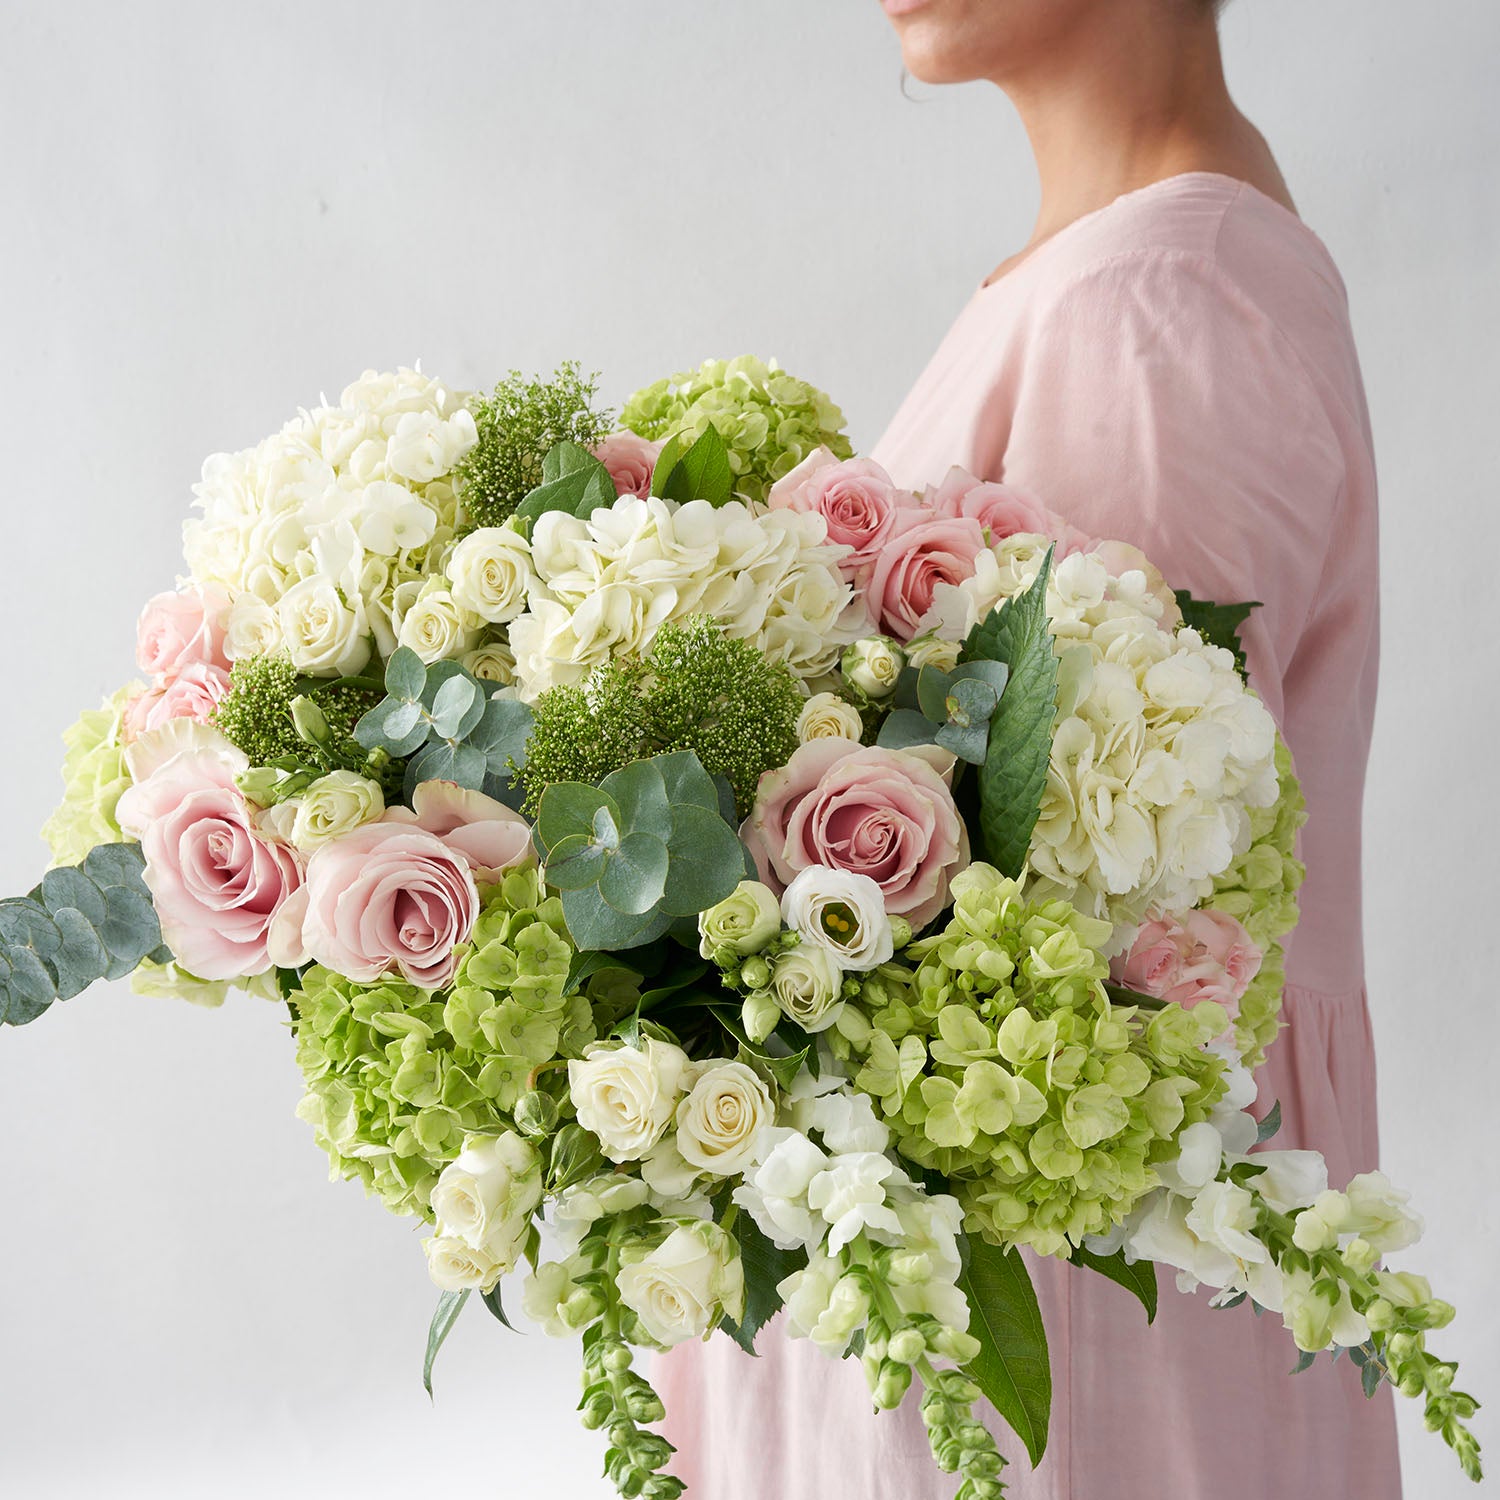 Woman in pink dress holding large bouquet of white, pale green, and pink flowers.